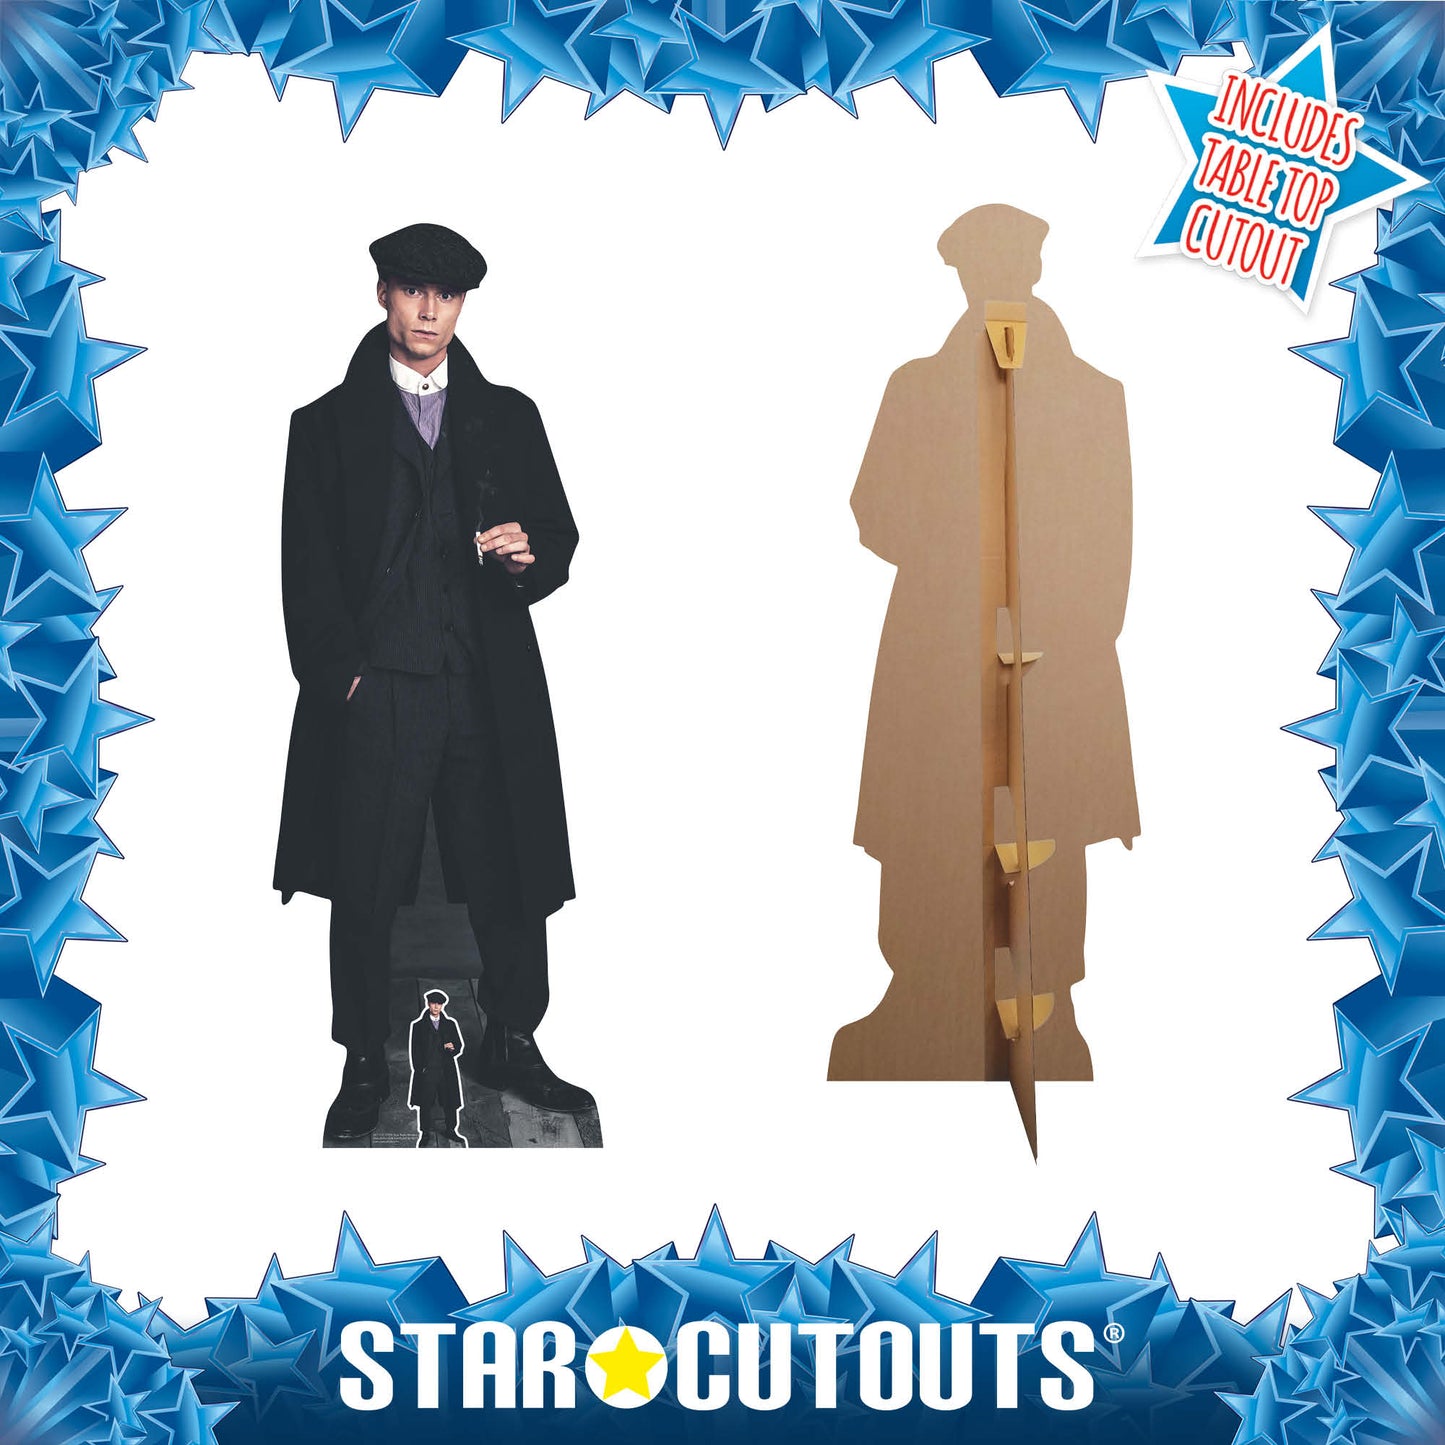 SC1175 1920's Style Peaky Blinders Gangster Smoking Cardboard Cut Out Height 185cm